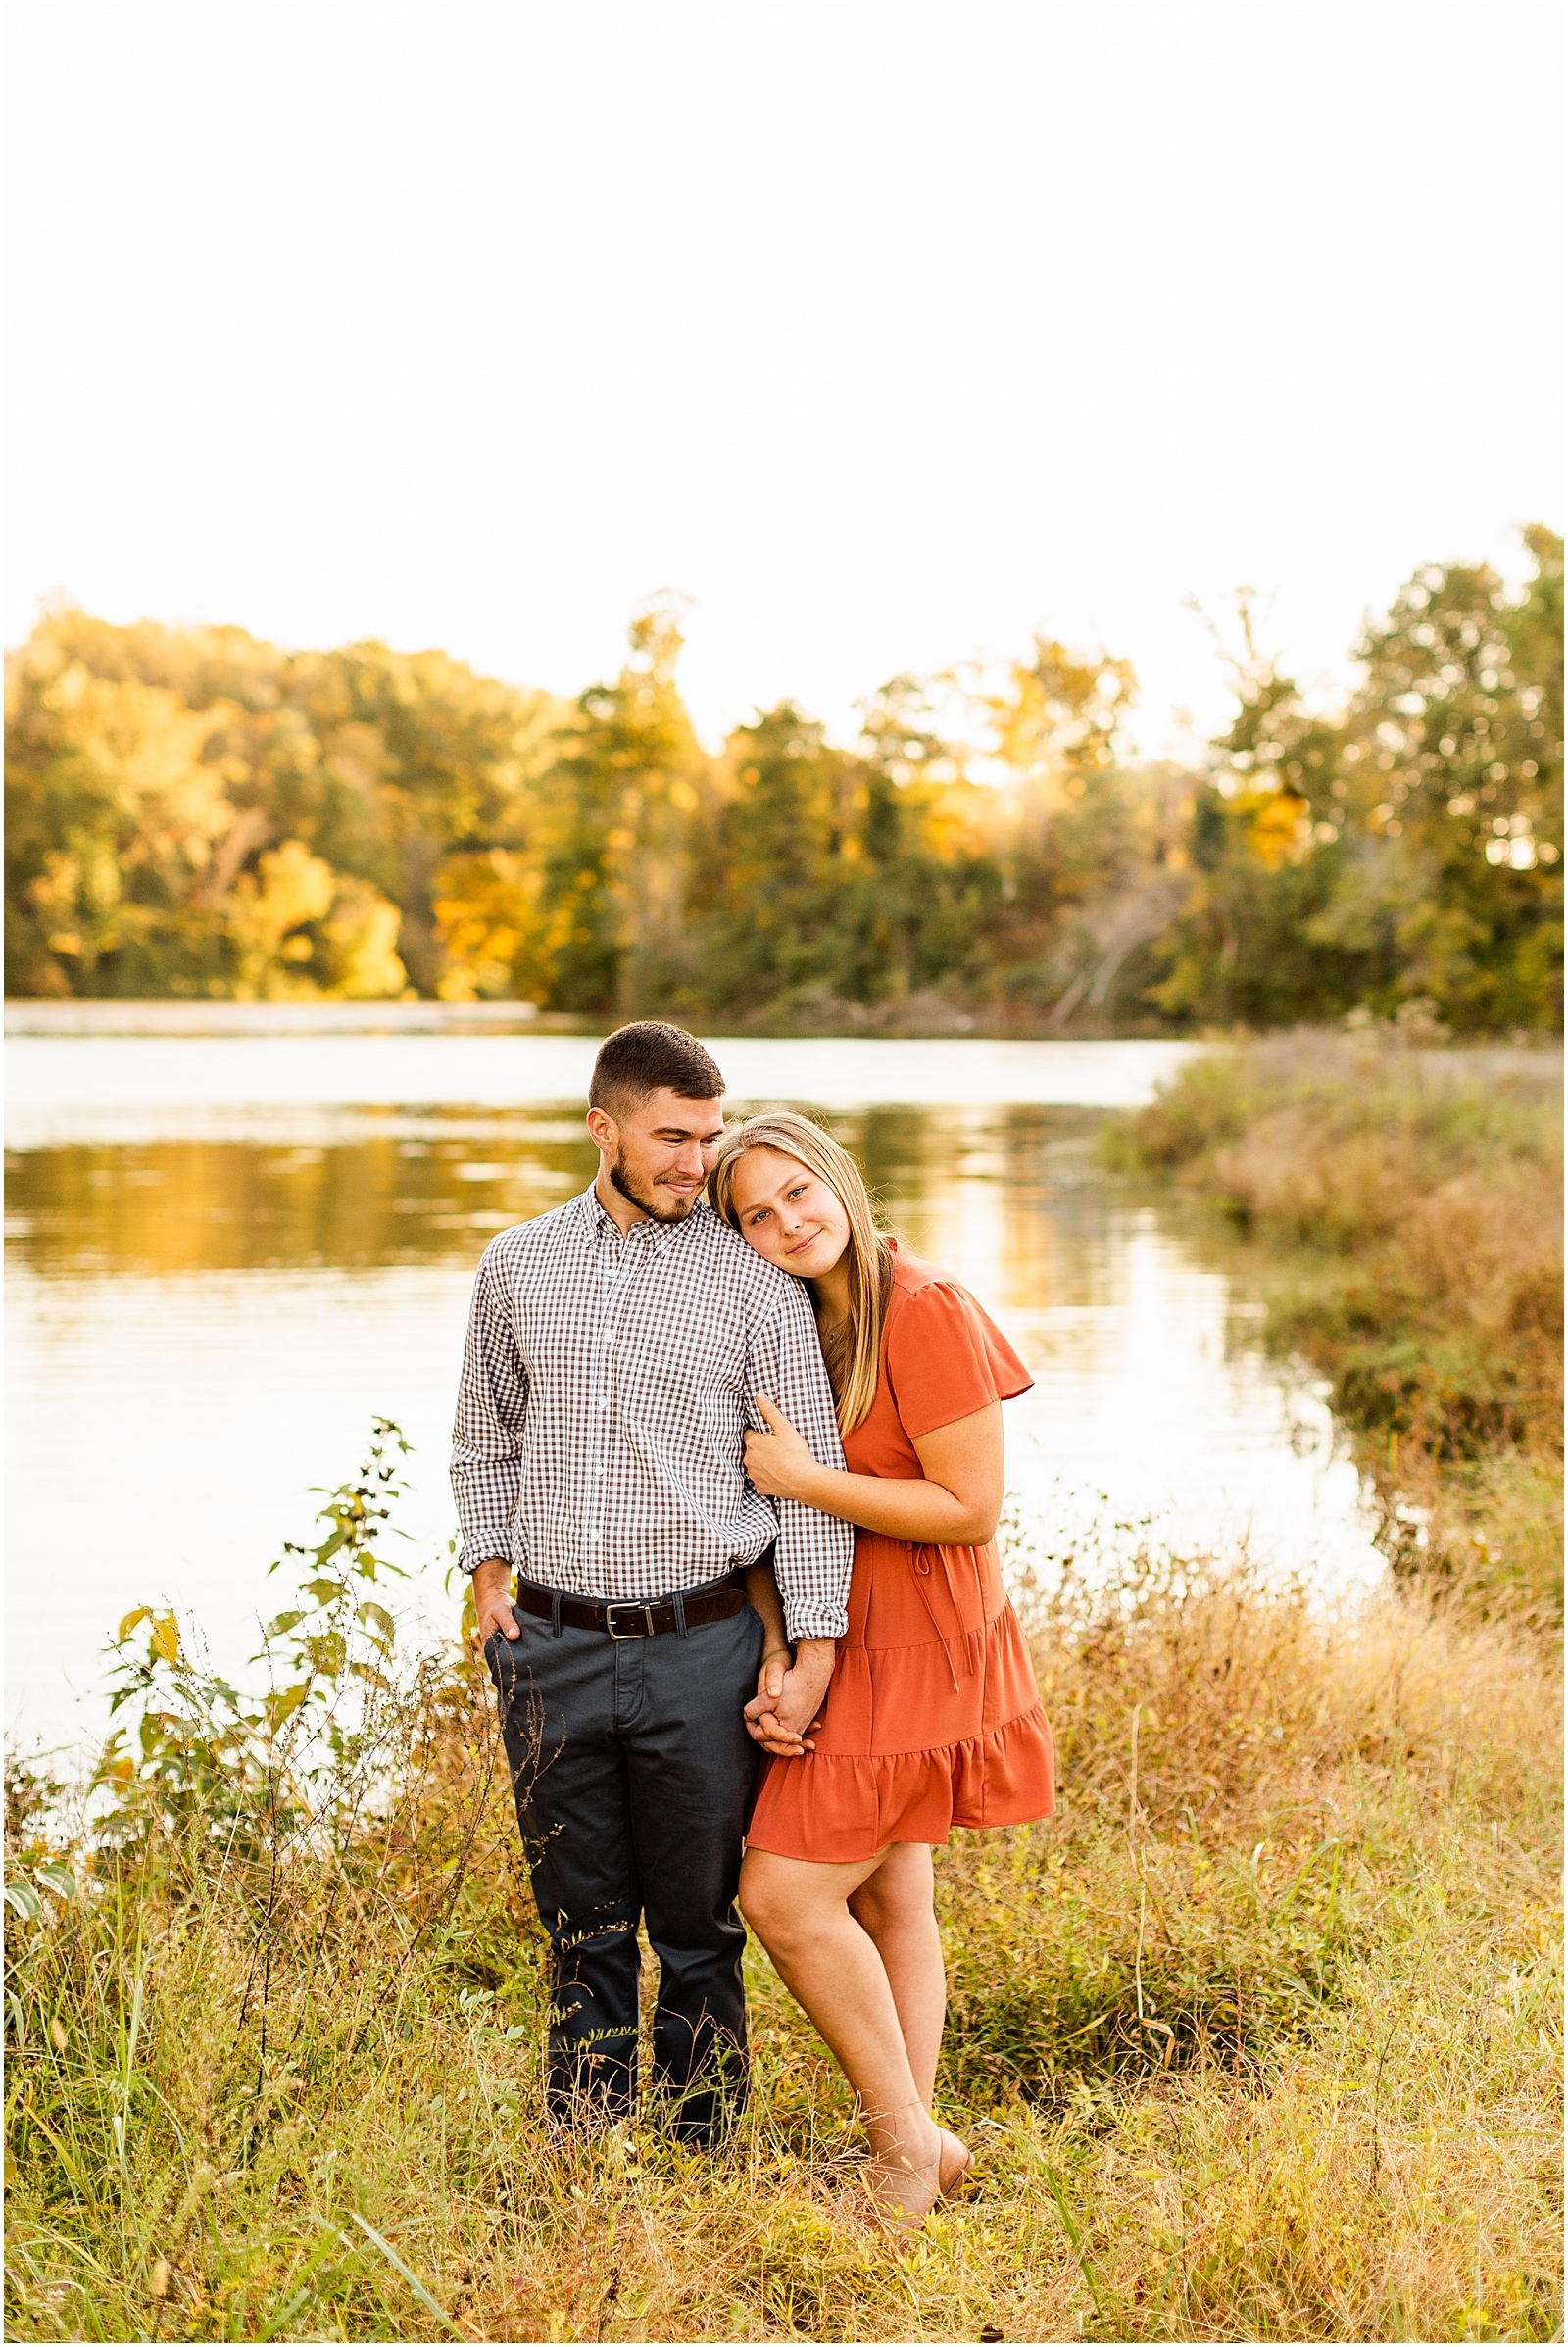 Claire and Kane's Riverside Engagement Session Bret and Brandie Photography | Evansville Indiana Wedding Photographers_0023.jpg